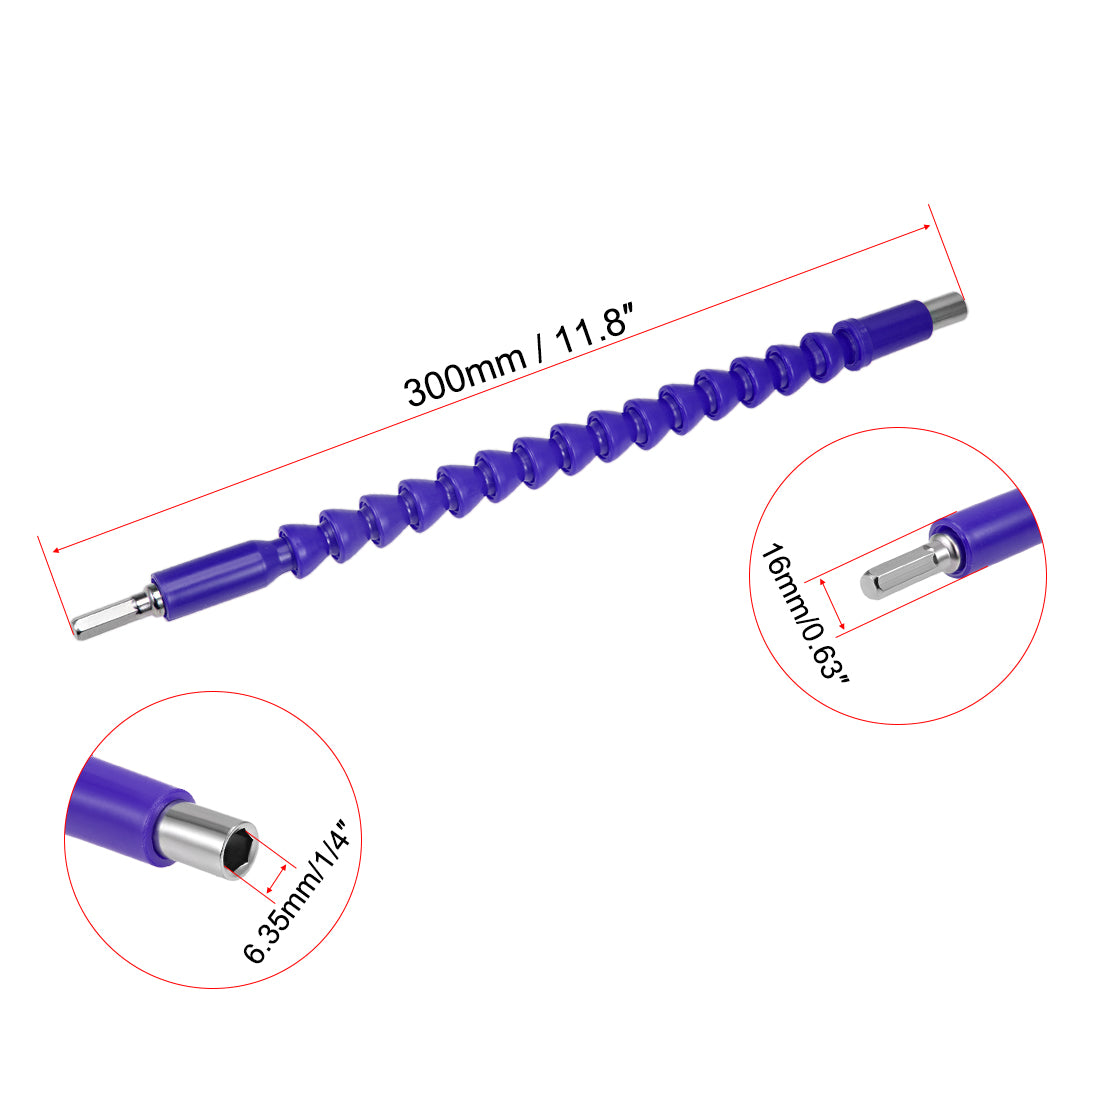 uxcell Uxcell Flexible Extension Screwdriver Bit Holder Magnetic Hex Shaft Screw Drill Connection Tip ,11.8 inch Flex Shaft,1/4''-Hexagon Drill Blue